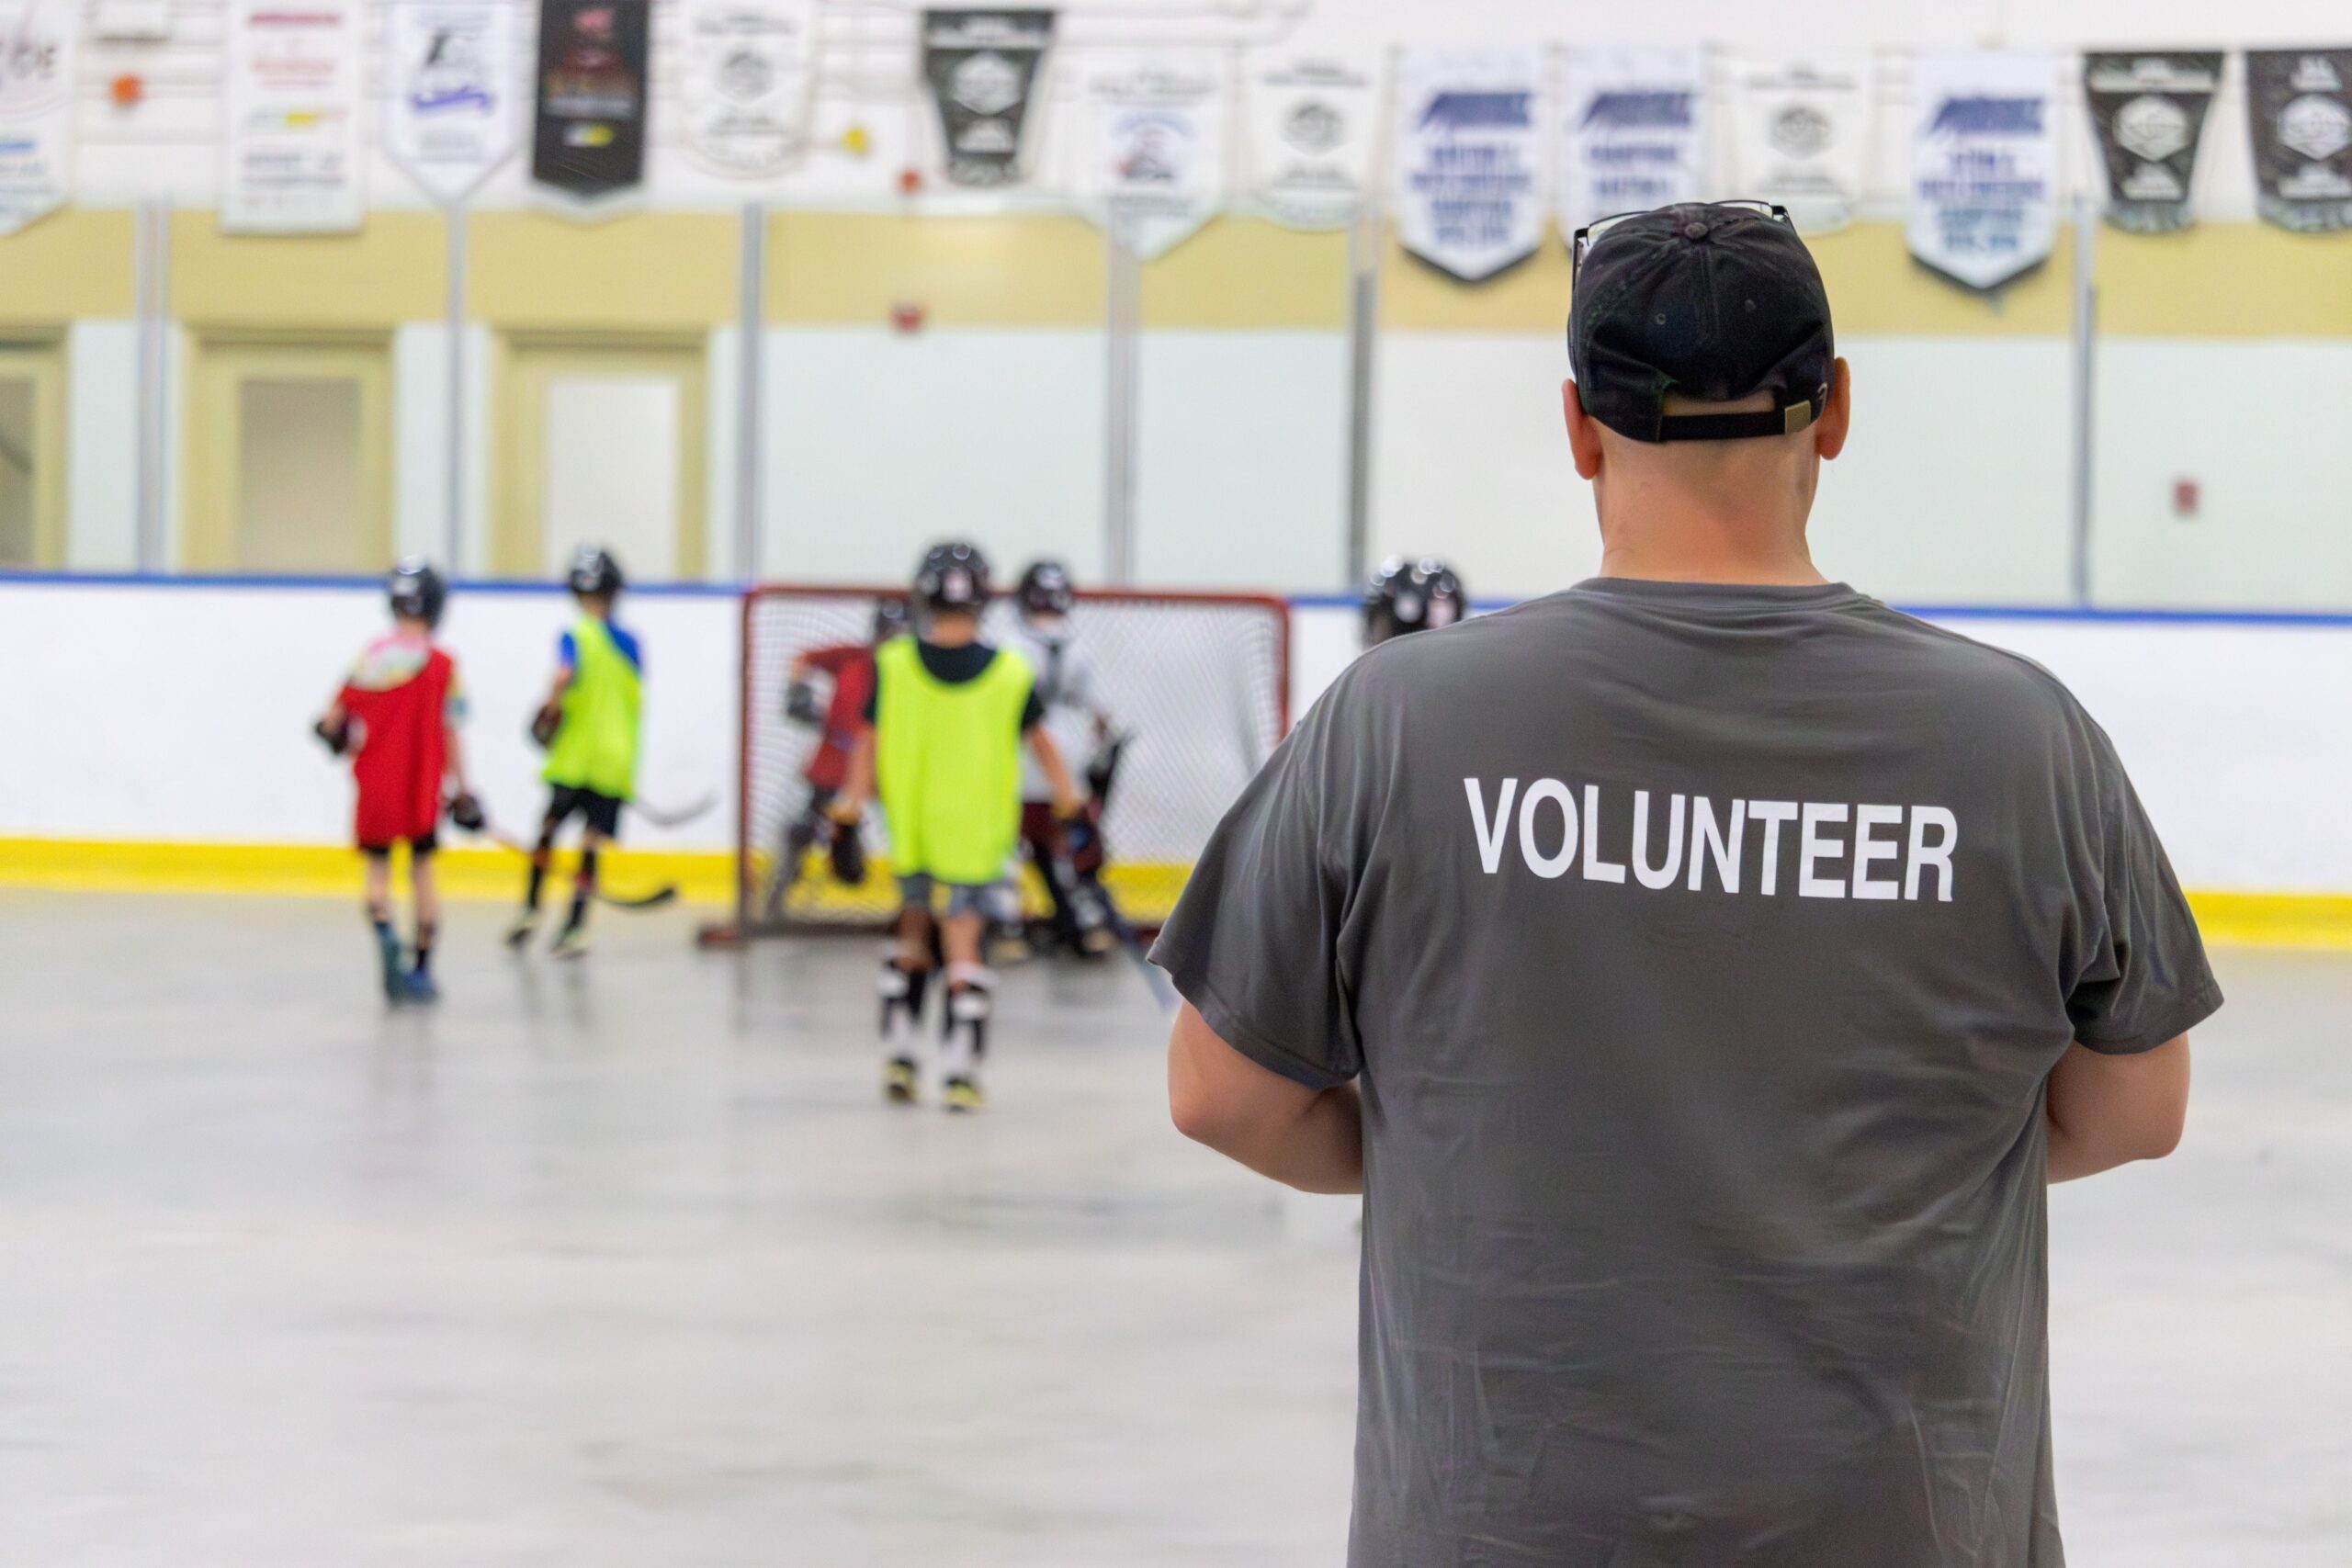 Man with his back to the camera wearing a volunteer shirt watches ball hockey